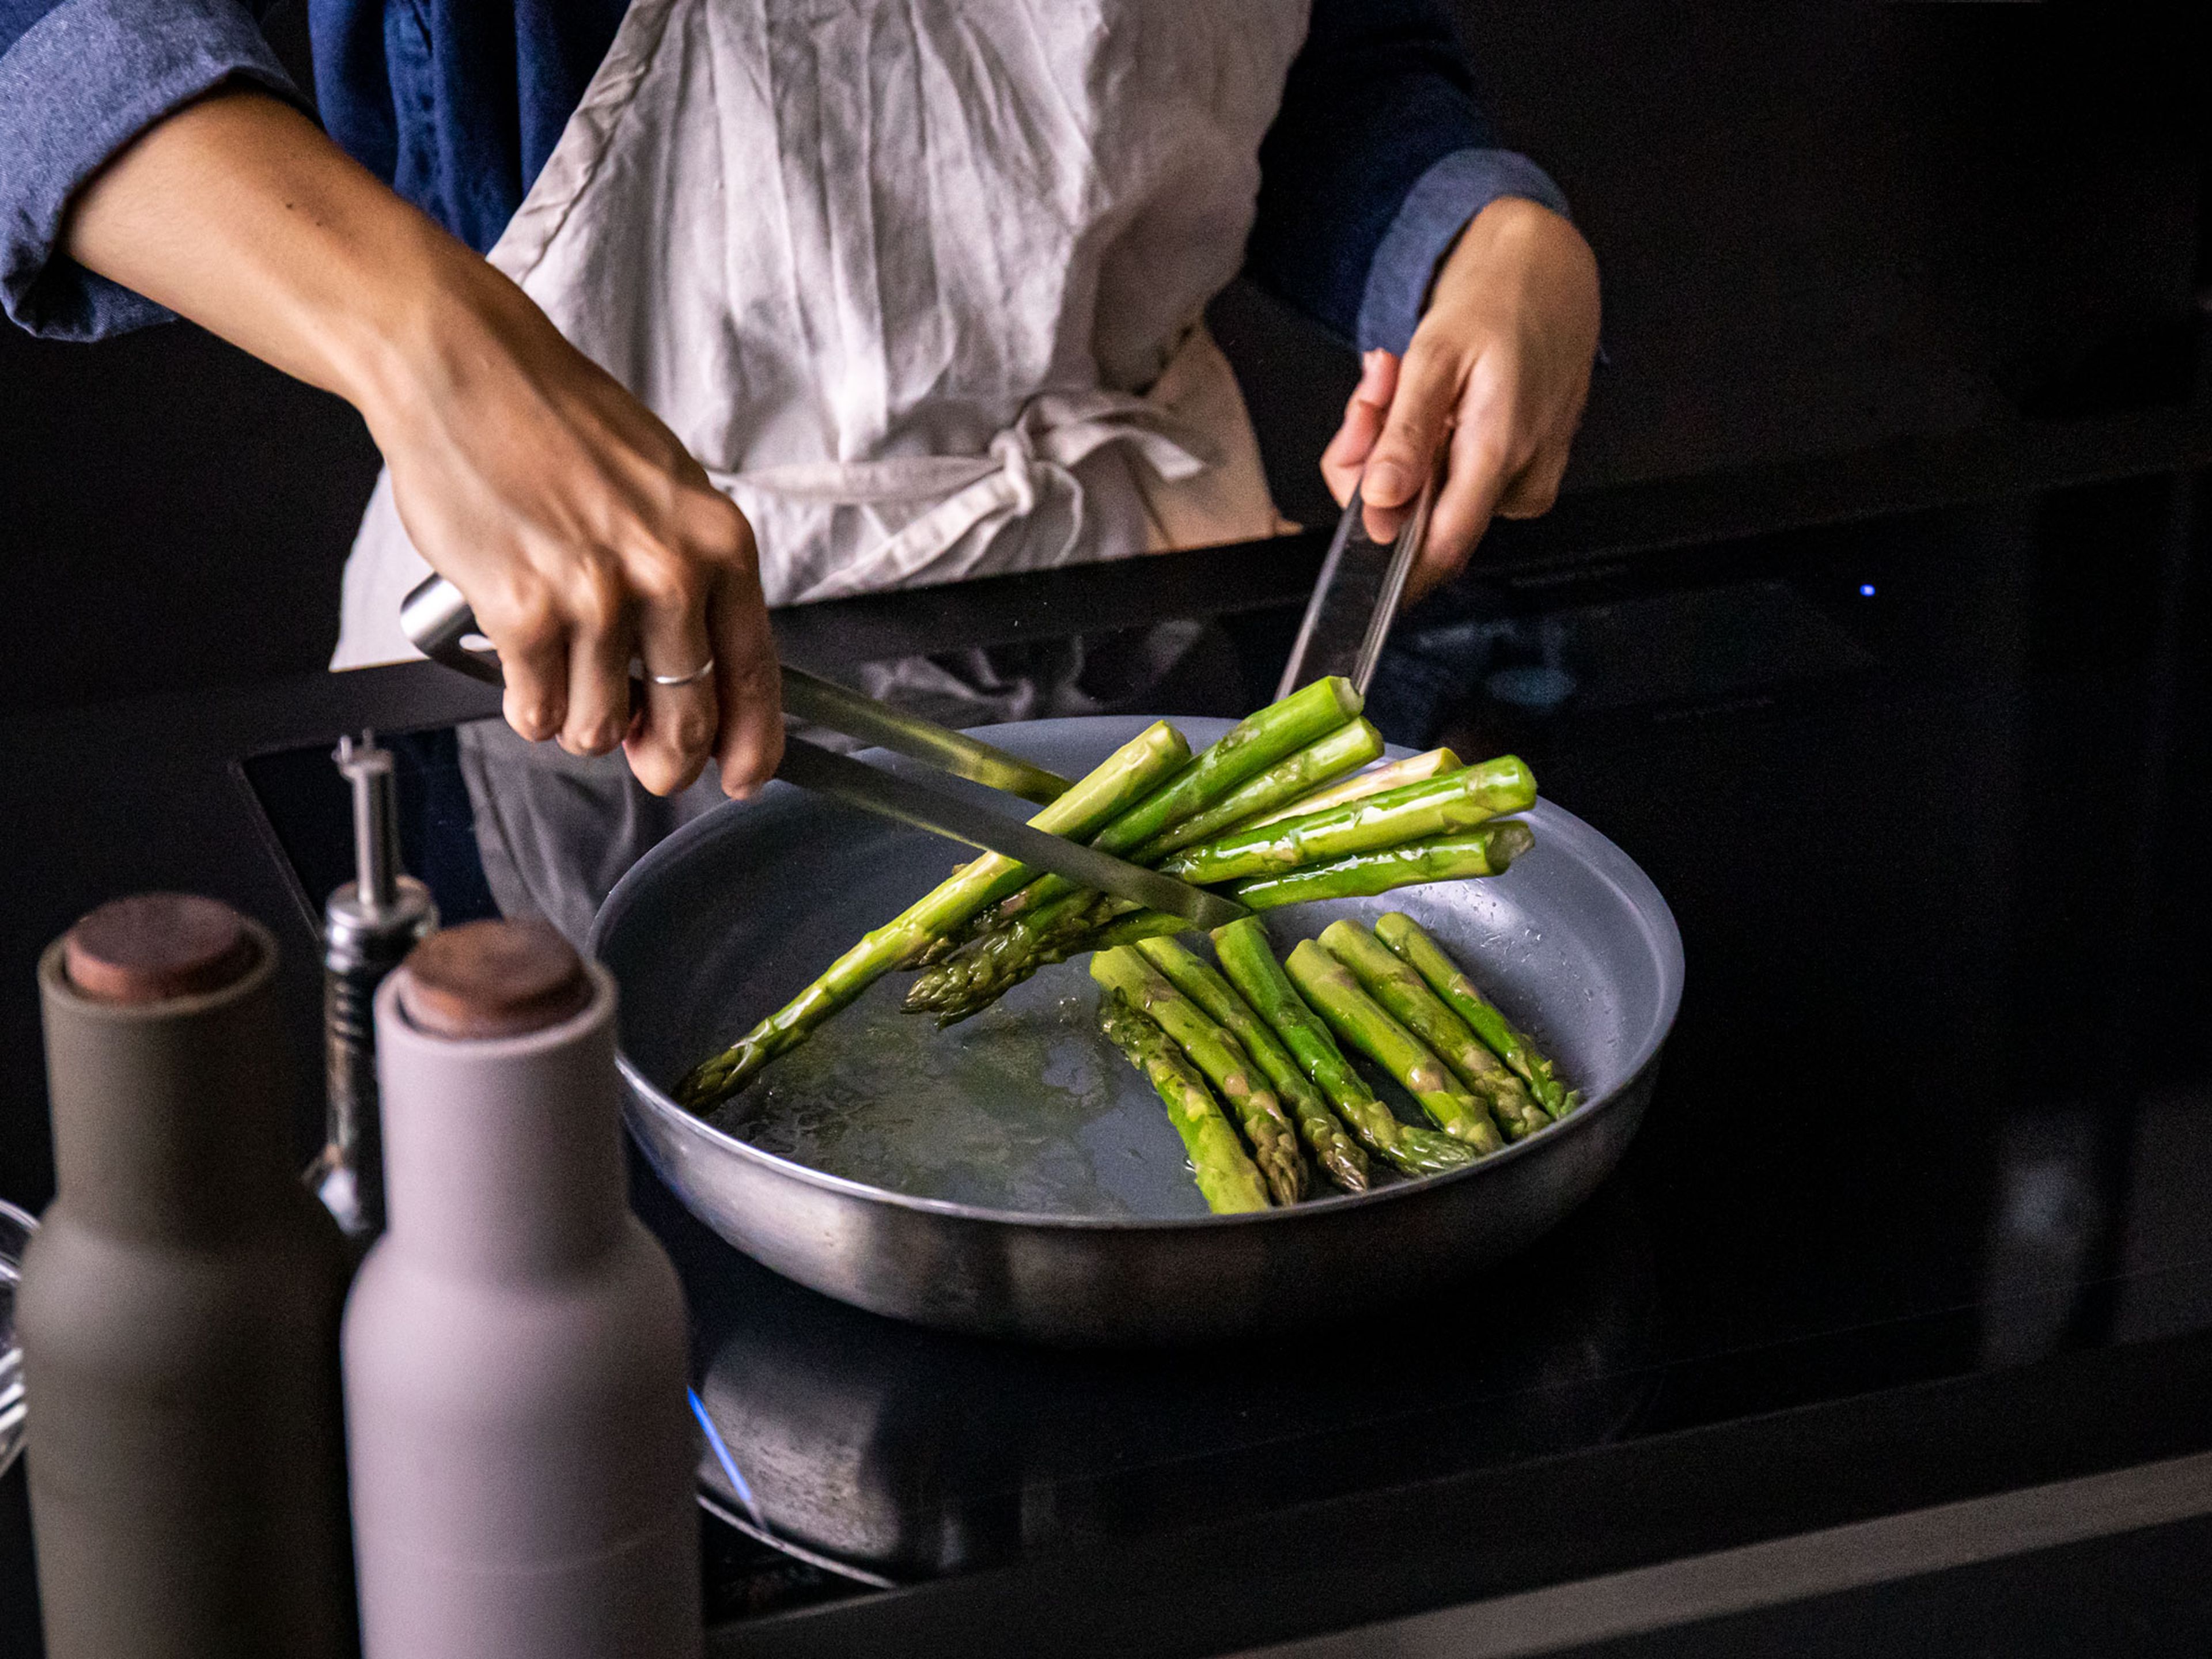 In the meantime, add some olive oil to a frying pan. Add asparagus to the pan and sauté until cooked through and brown in spots, approx. 8 min. Remove from pan and set aside.